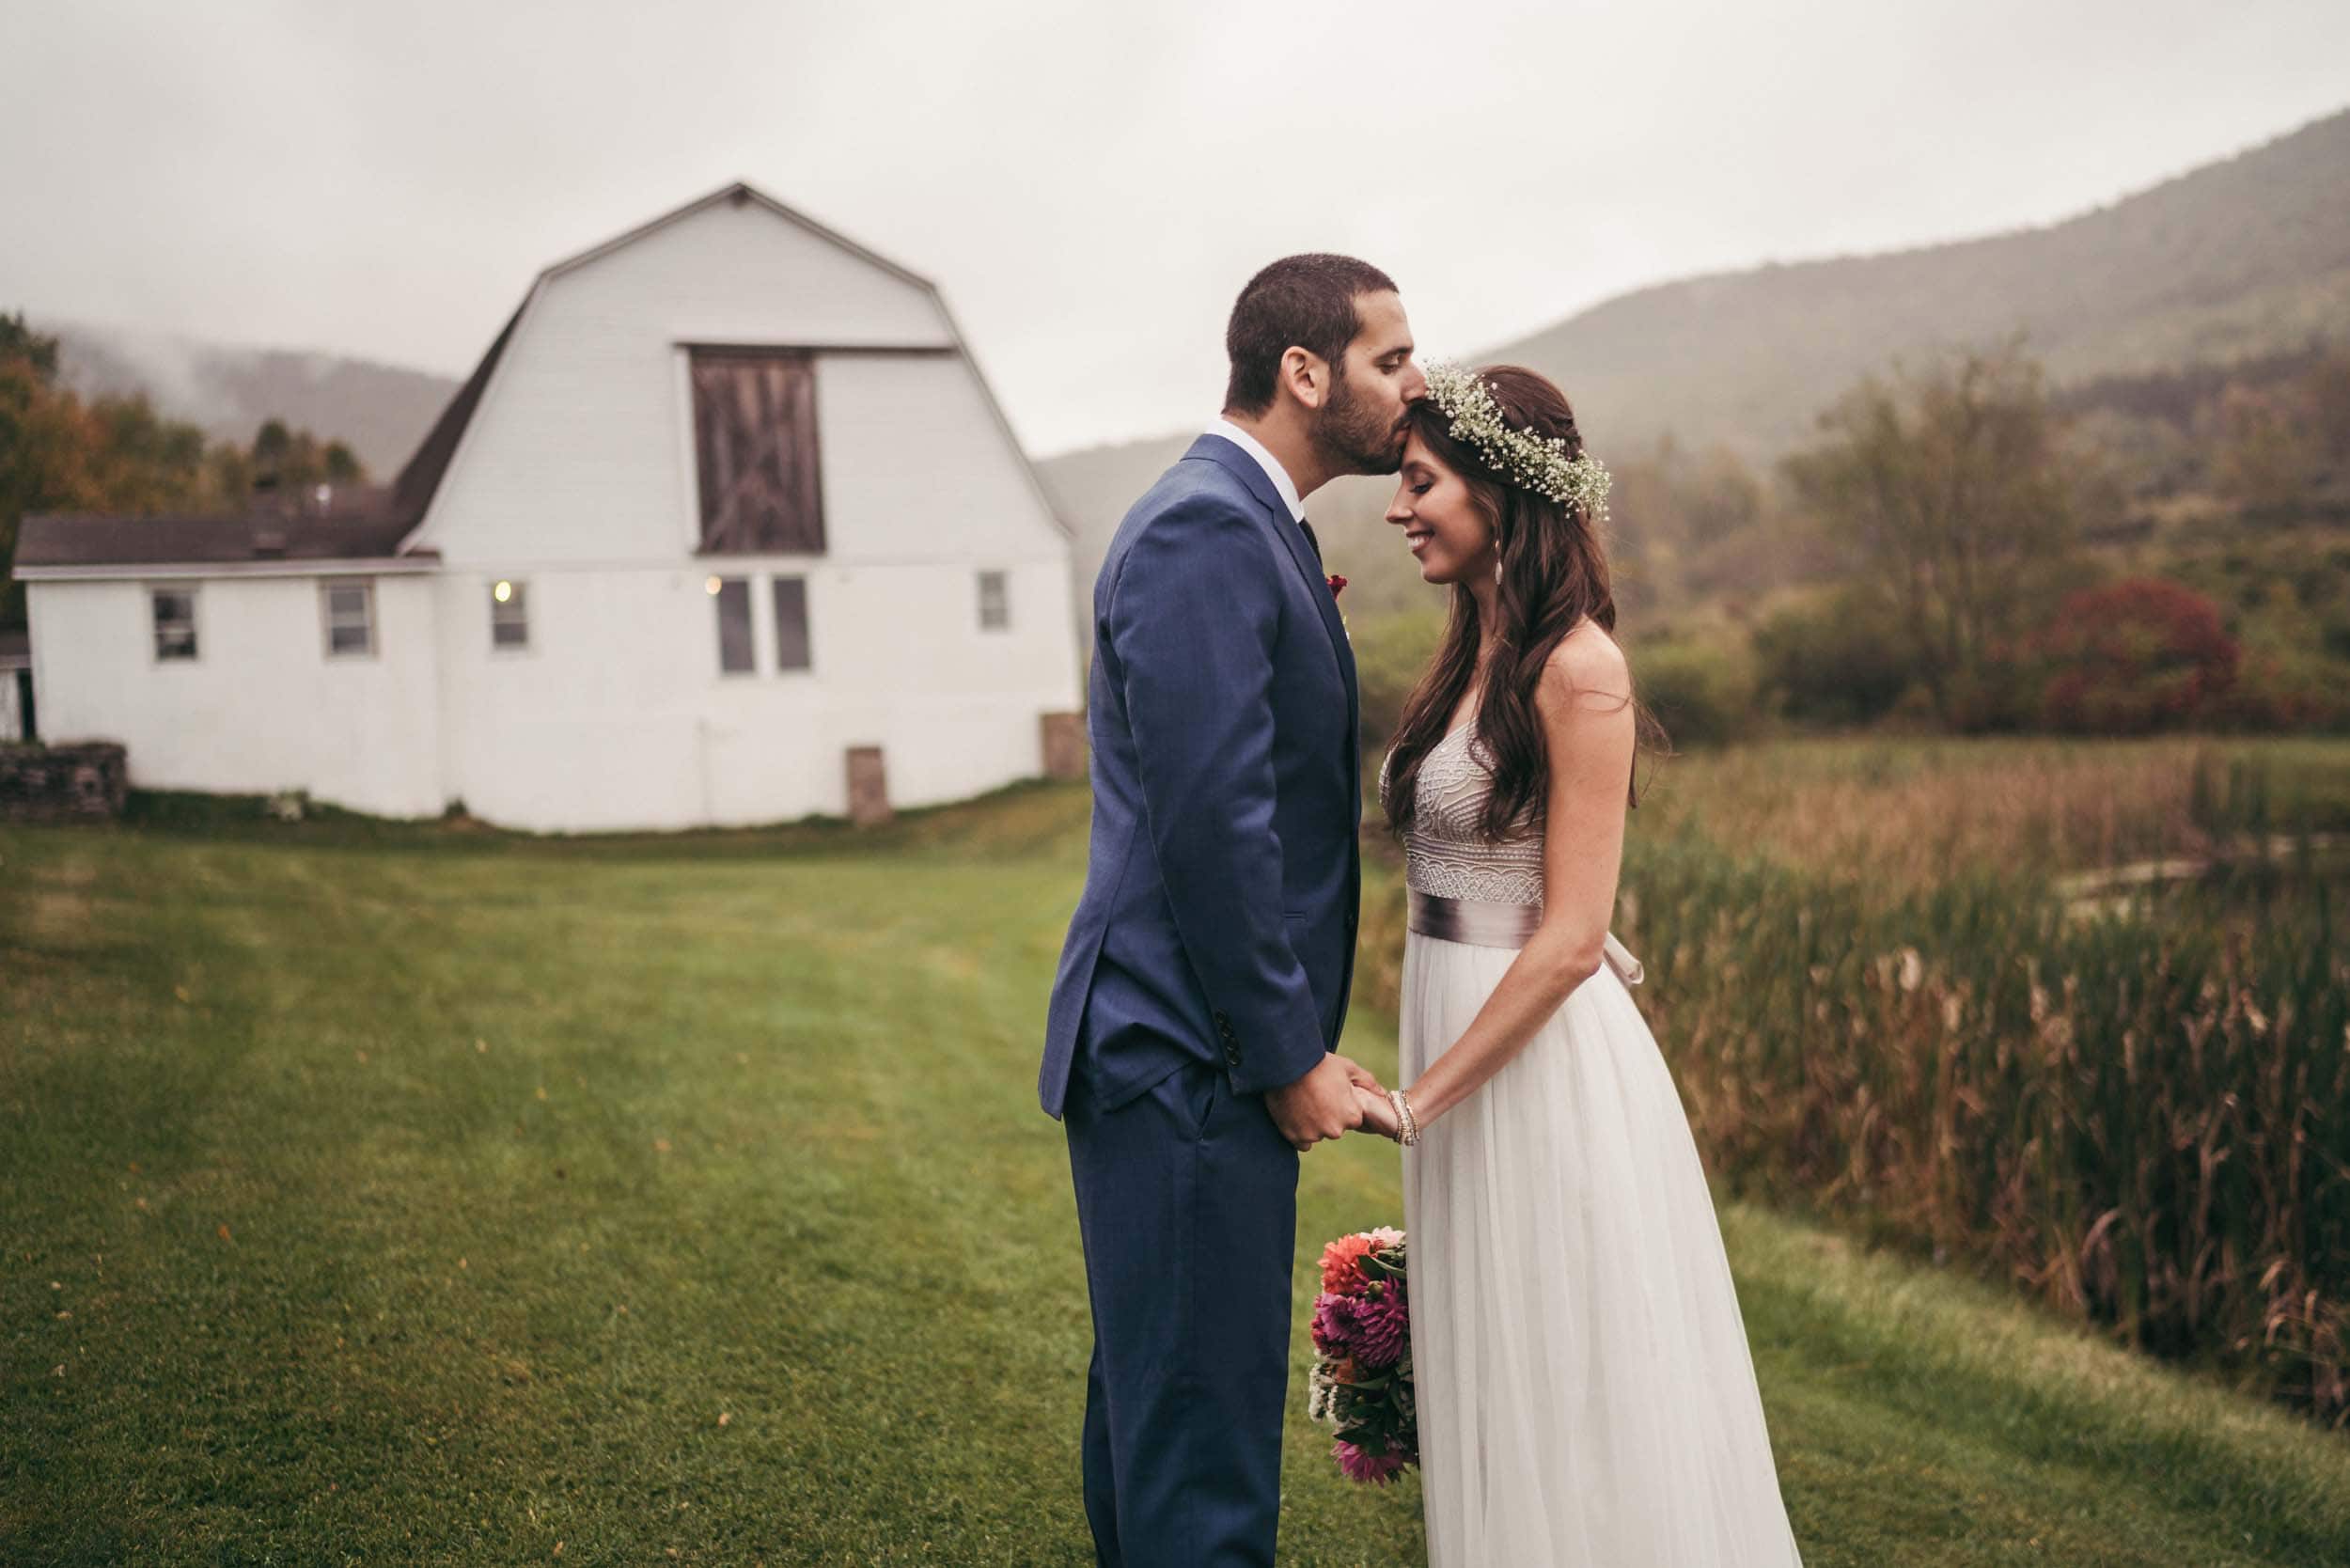 A bride with long brown hear wearing a flower crown of baby's breath and a sleeveless white wedding dress receives a forehead kiss from a groom in a blue suit. Behind them is a barn, along with misty foothills and farmland.